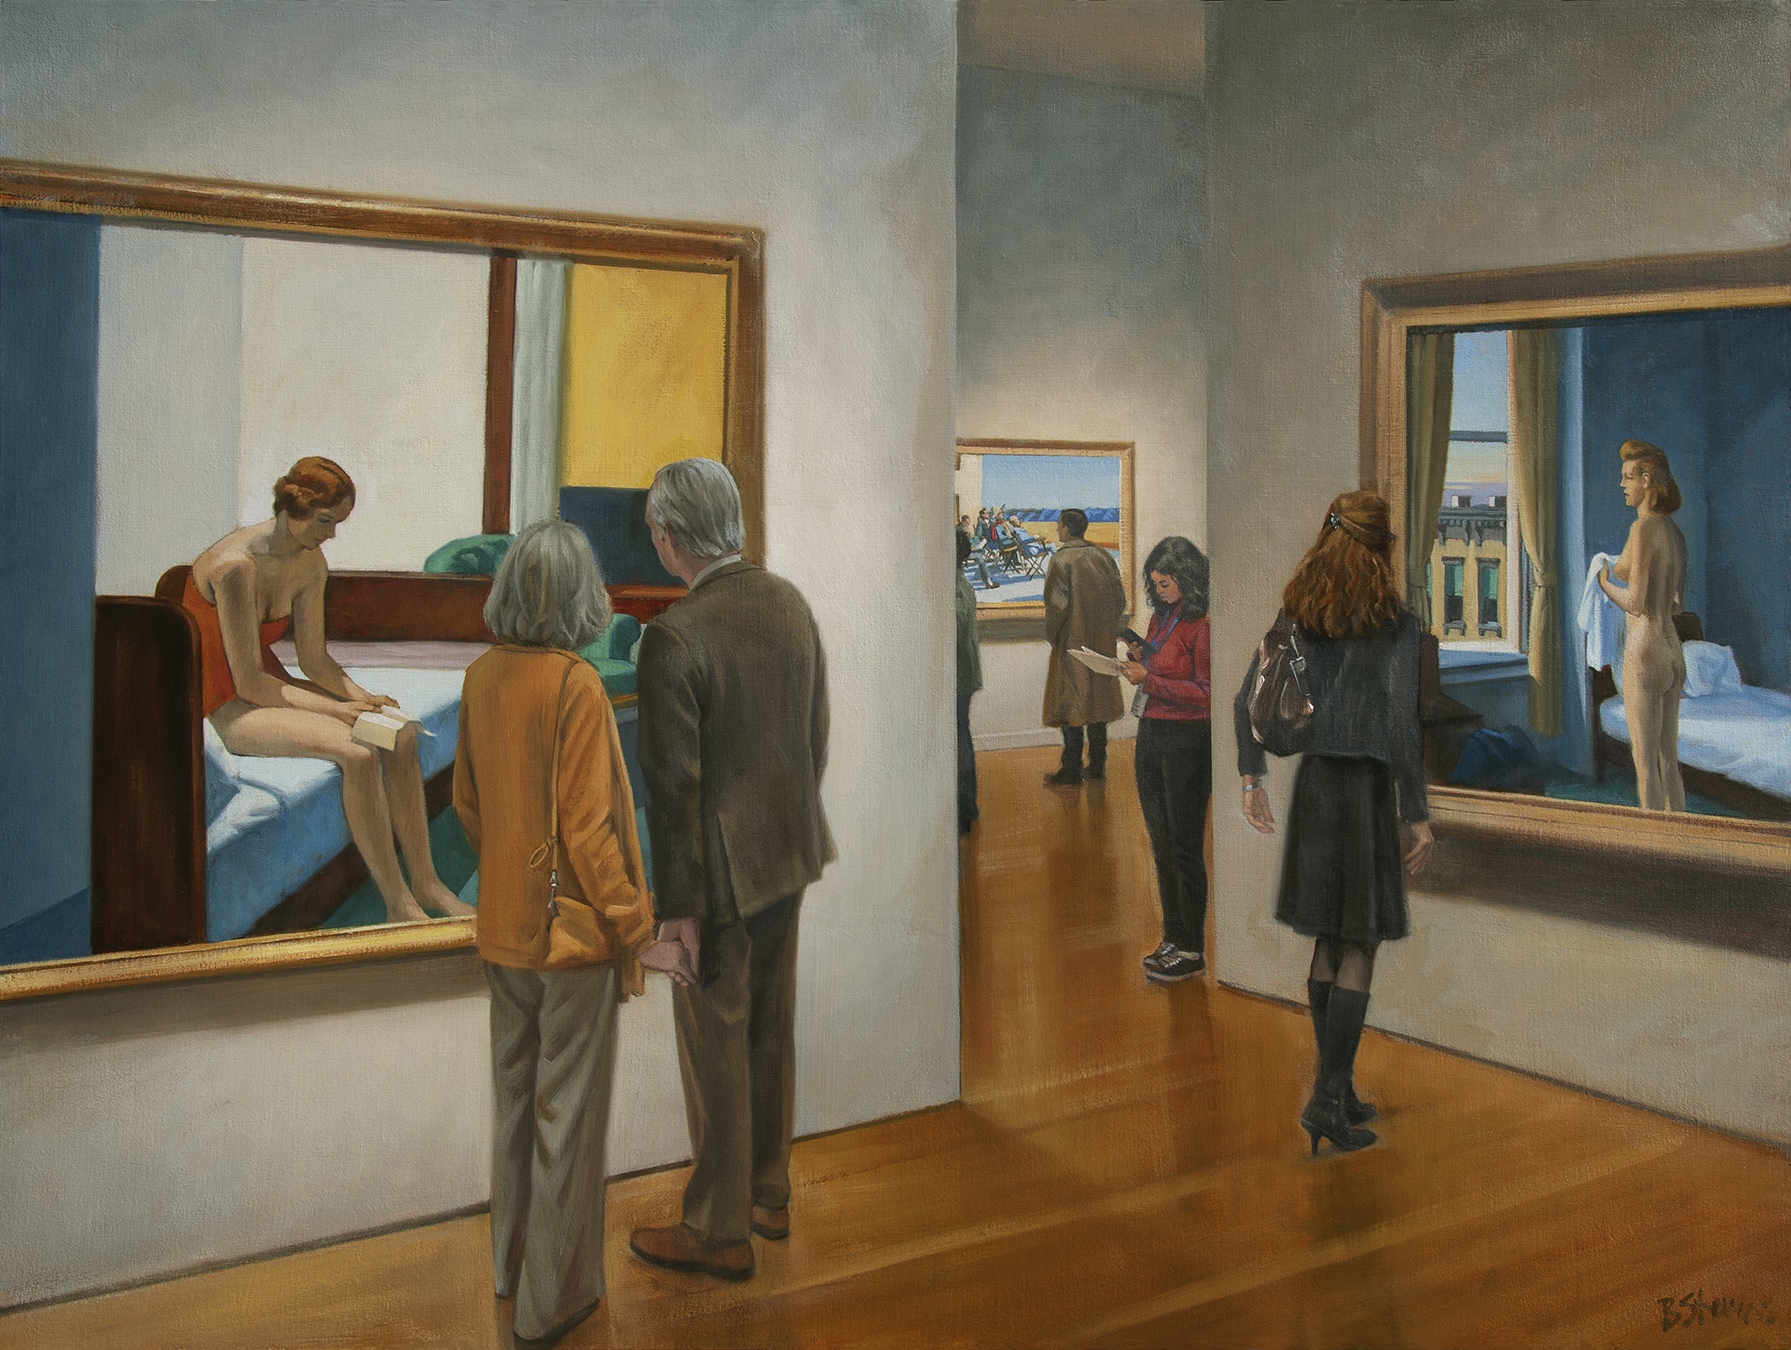 intimacy & isolation, oil painting, figurative painting, museum interior painting, Edward Hopper paintings, Museum of Fine Arts Richmond, Edward Hopper Hotel Room, Edward Hopper Morning in a City